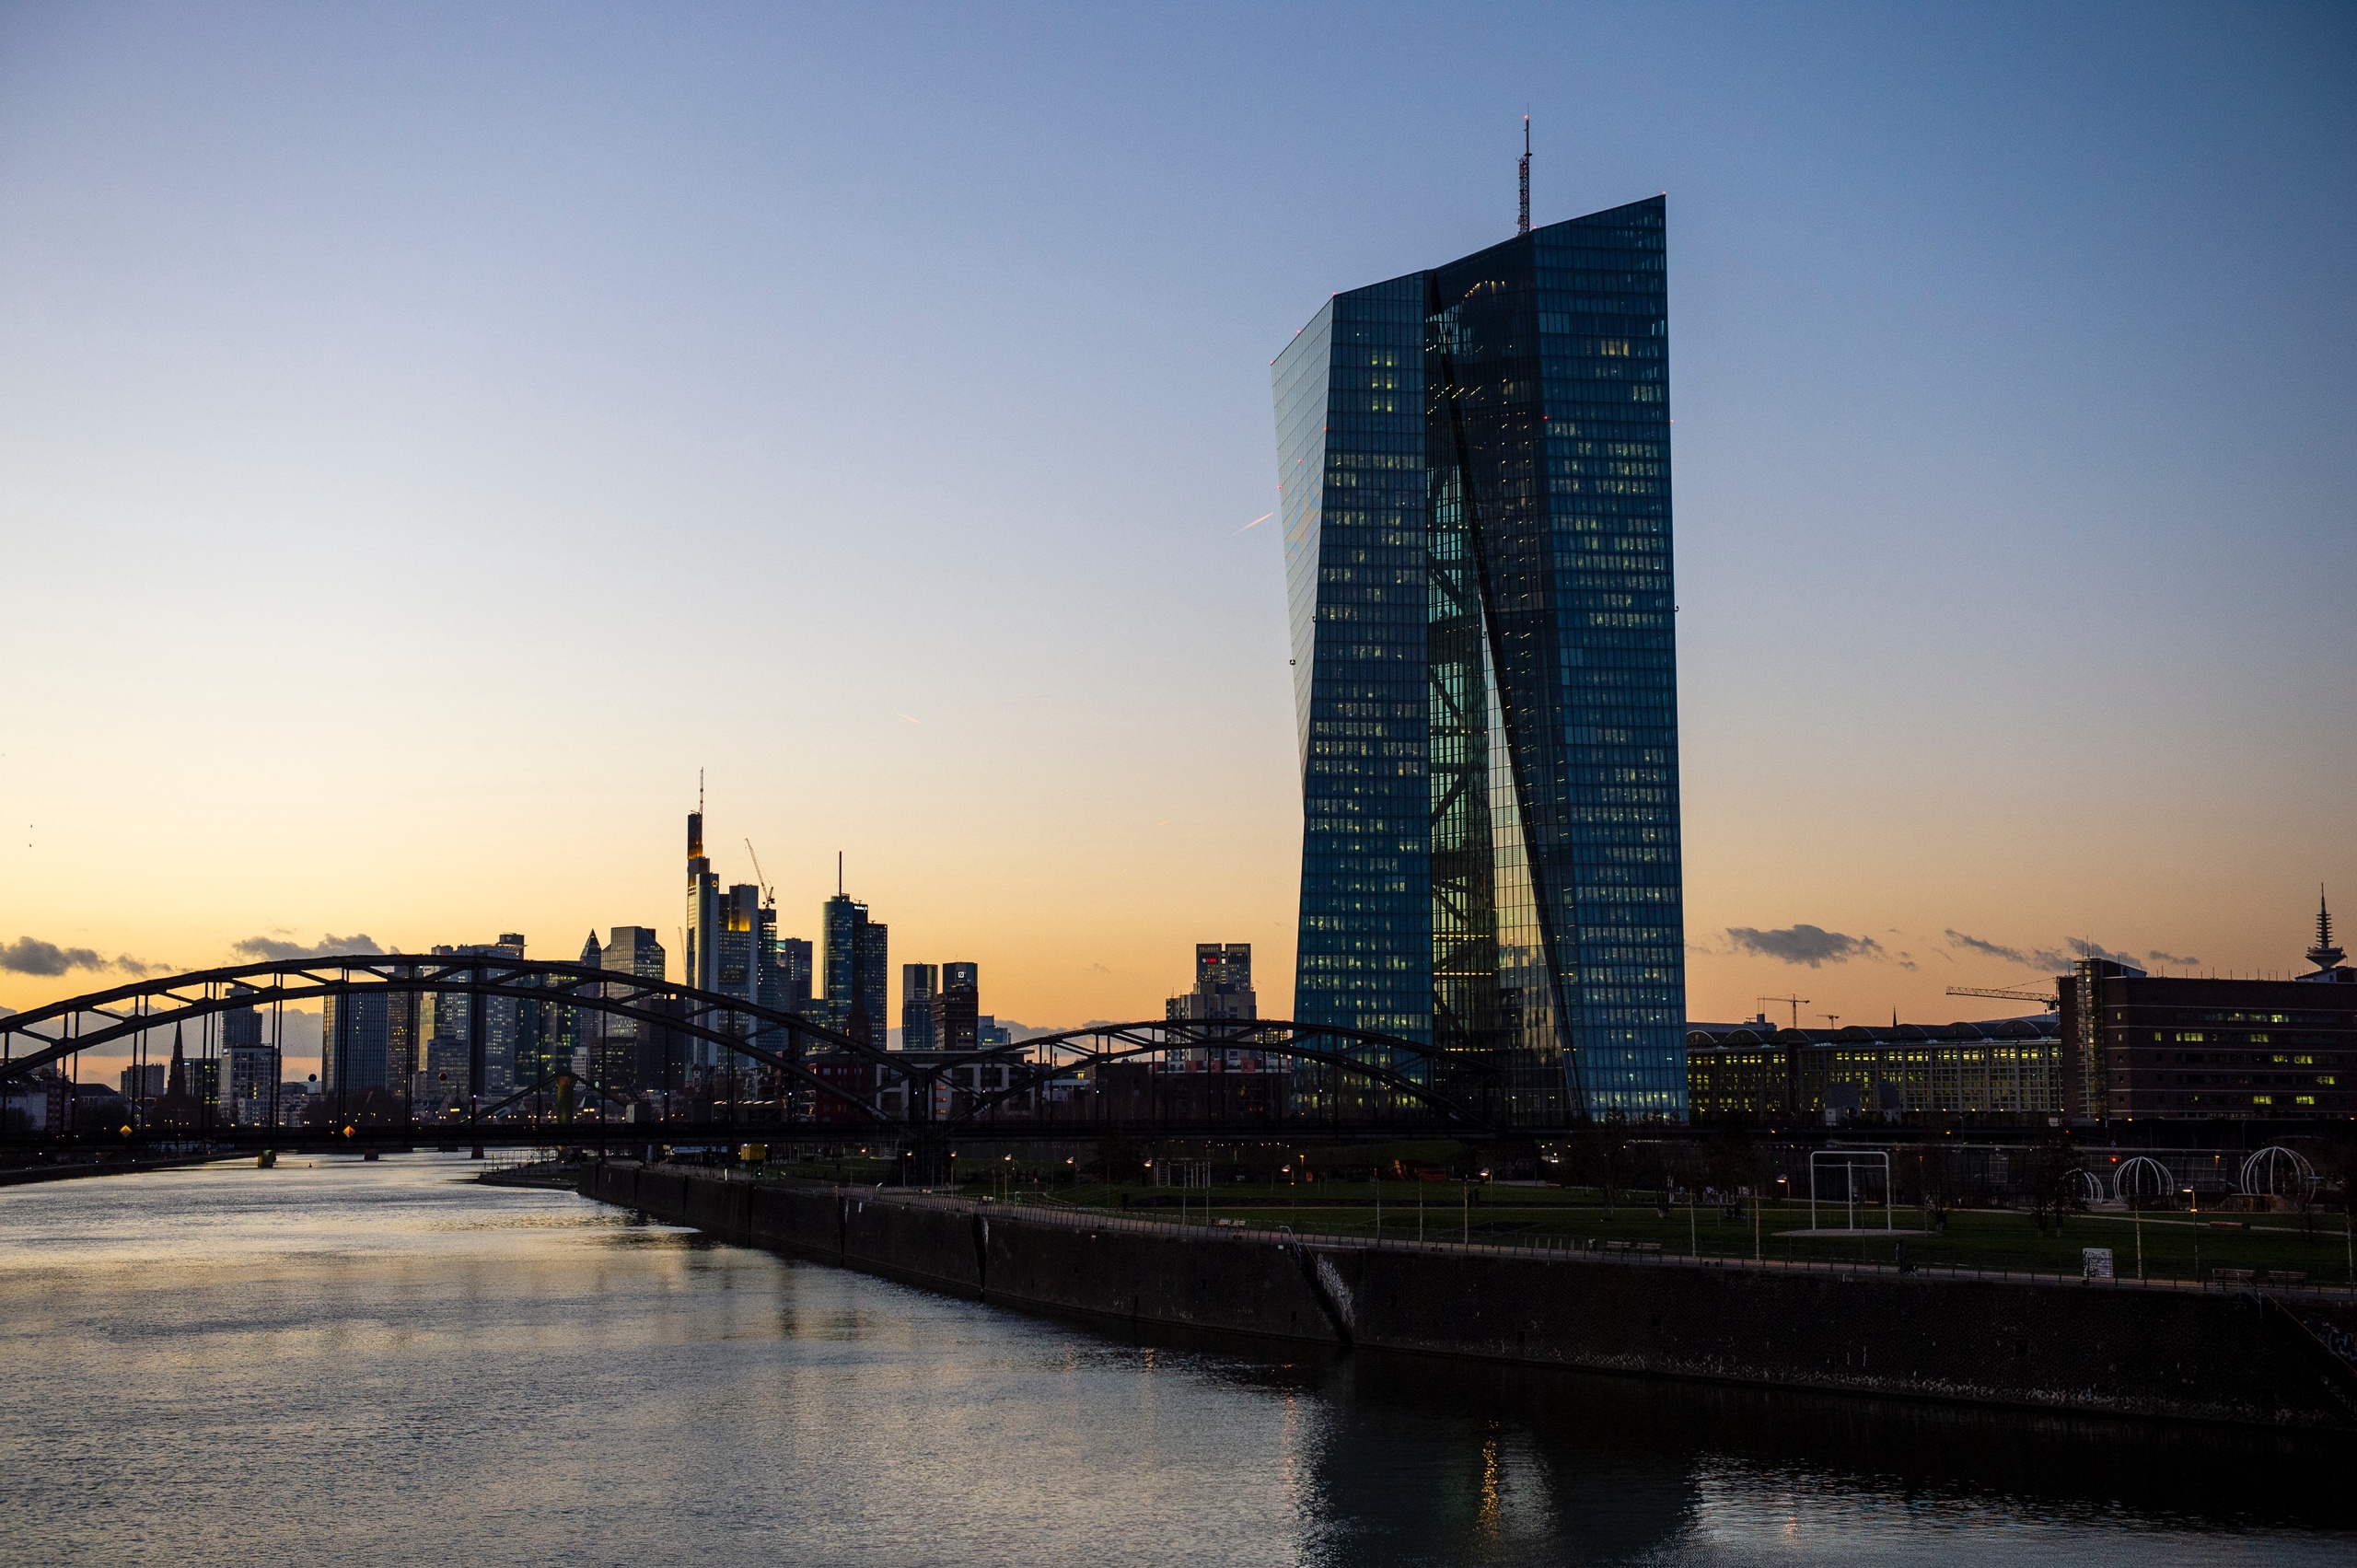 The ECB's Supervisory Board meets unscheduled to discuss vulnerabilities in the European banking sector. 